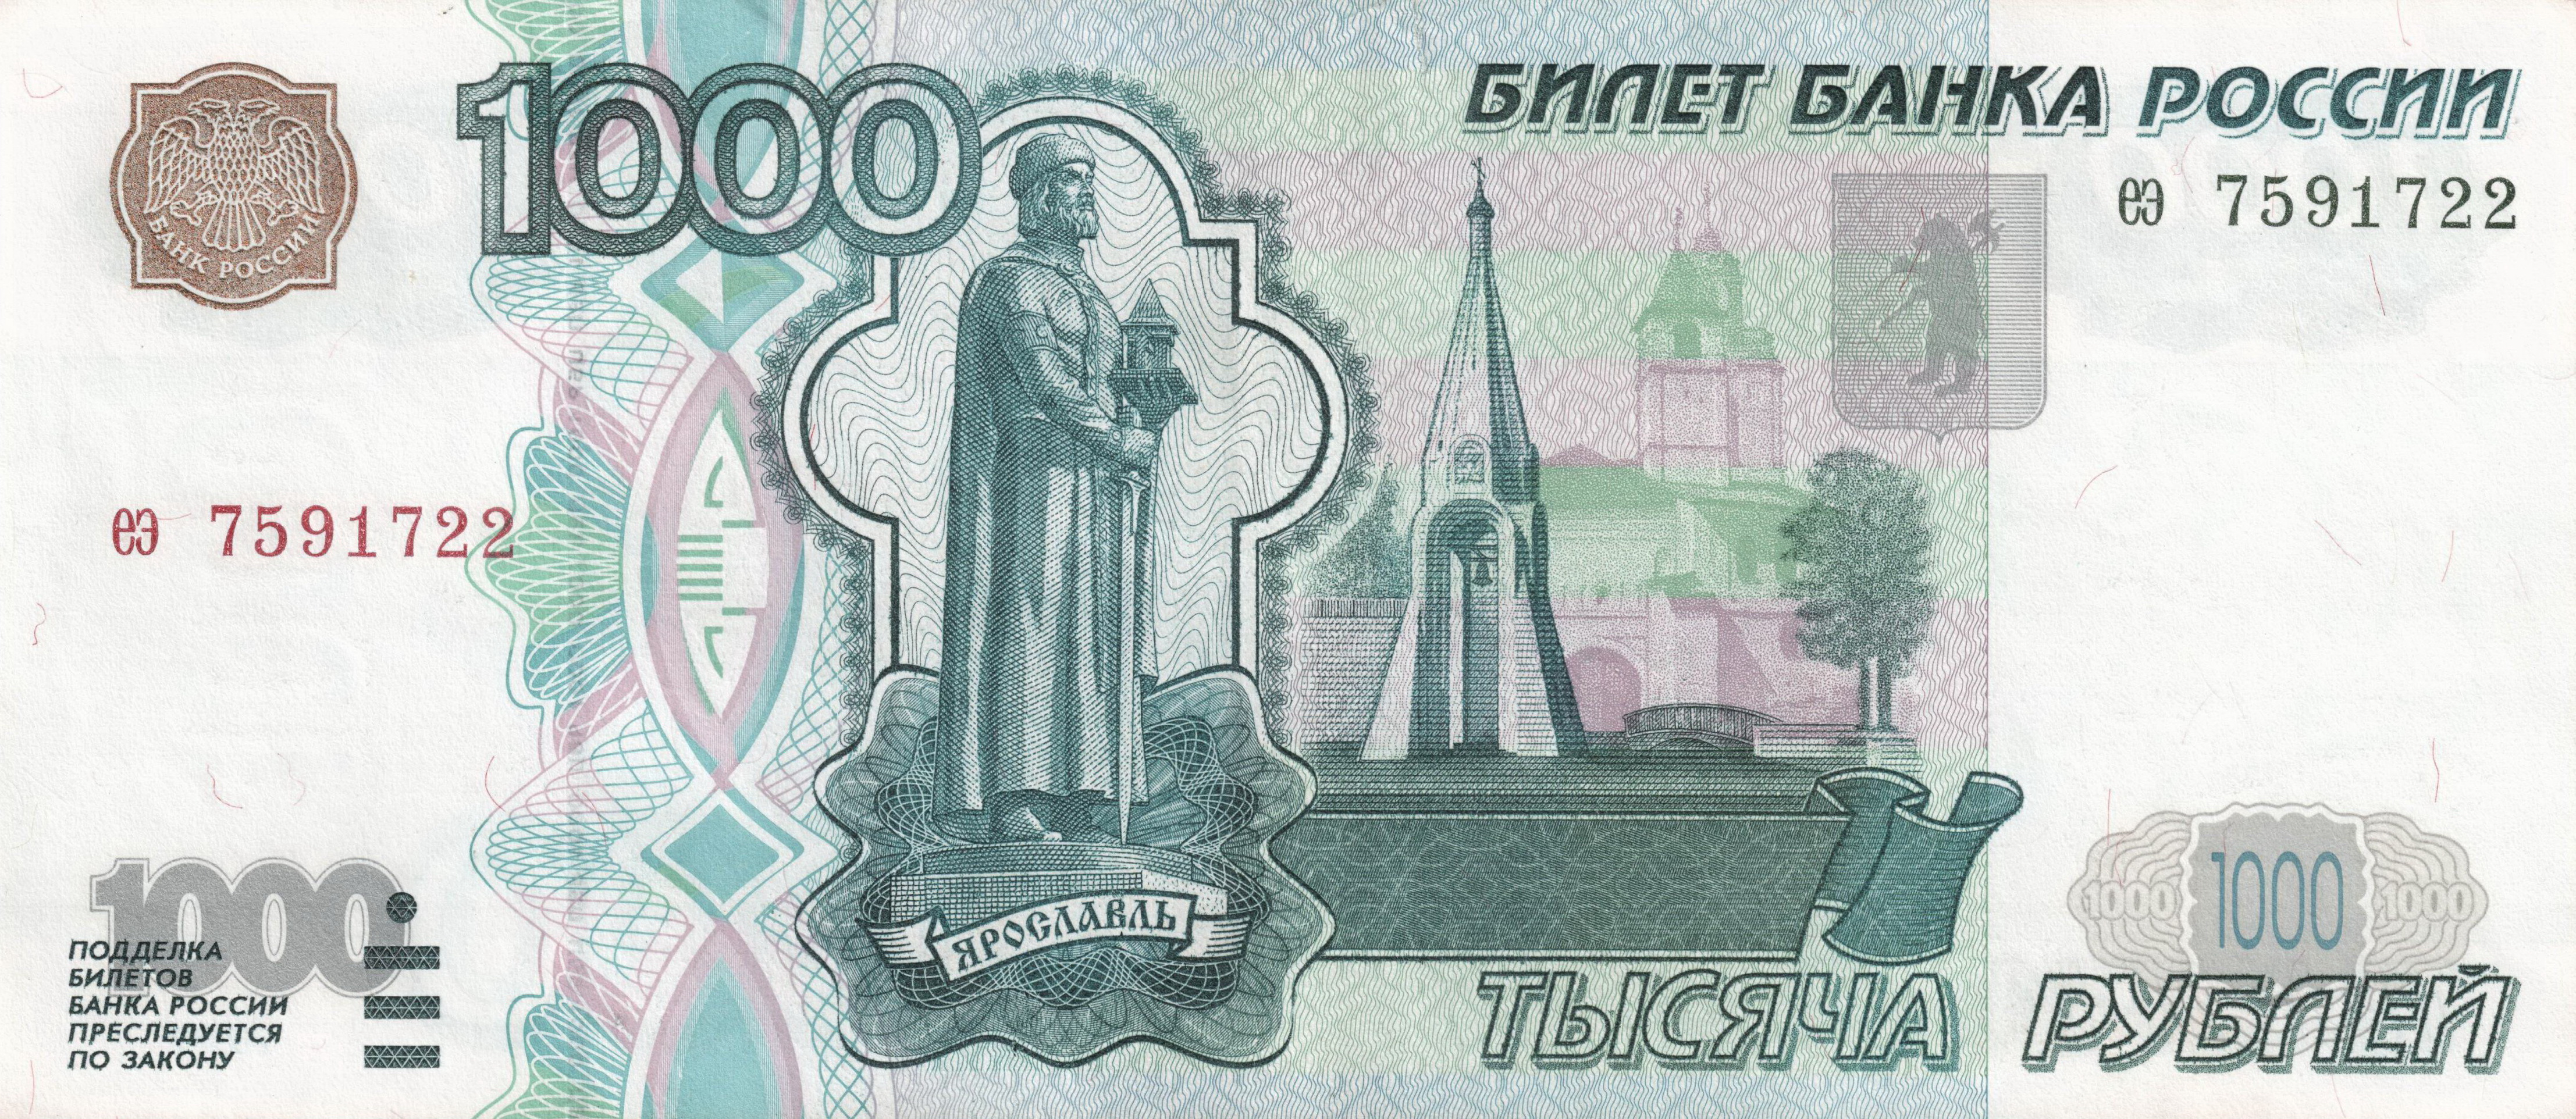 File:Banknote 1000 rubles (1997) front.jpg - Wikimedia Commons